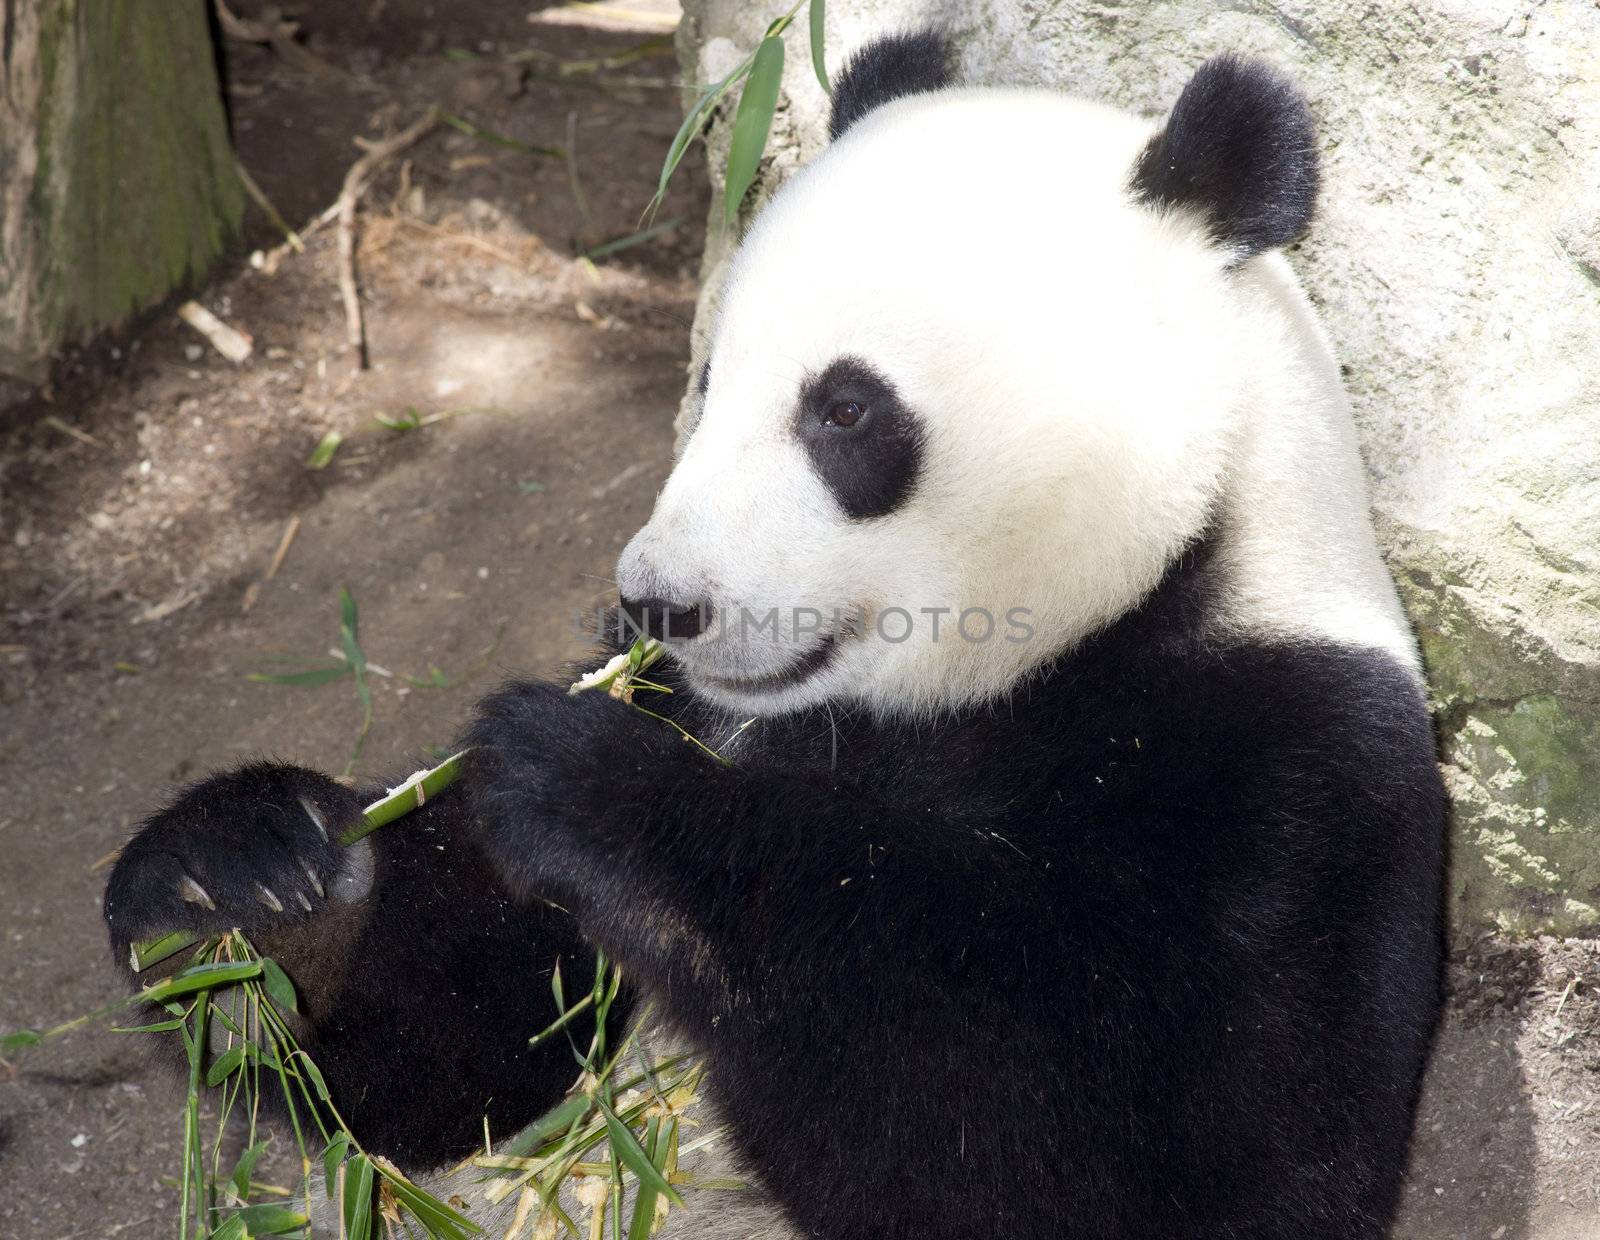 A panda takes lunch as he does for most of the day on bamboo